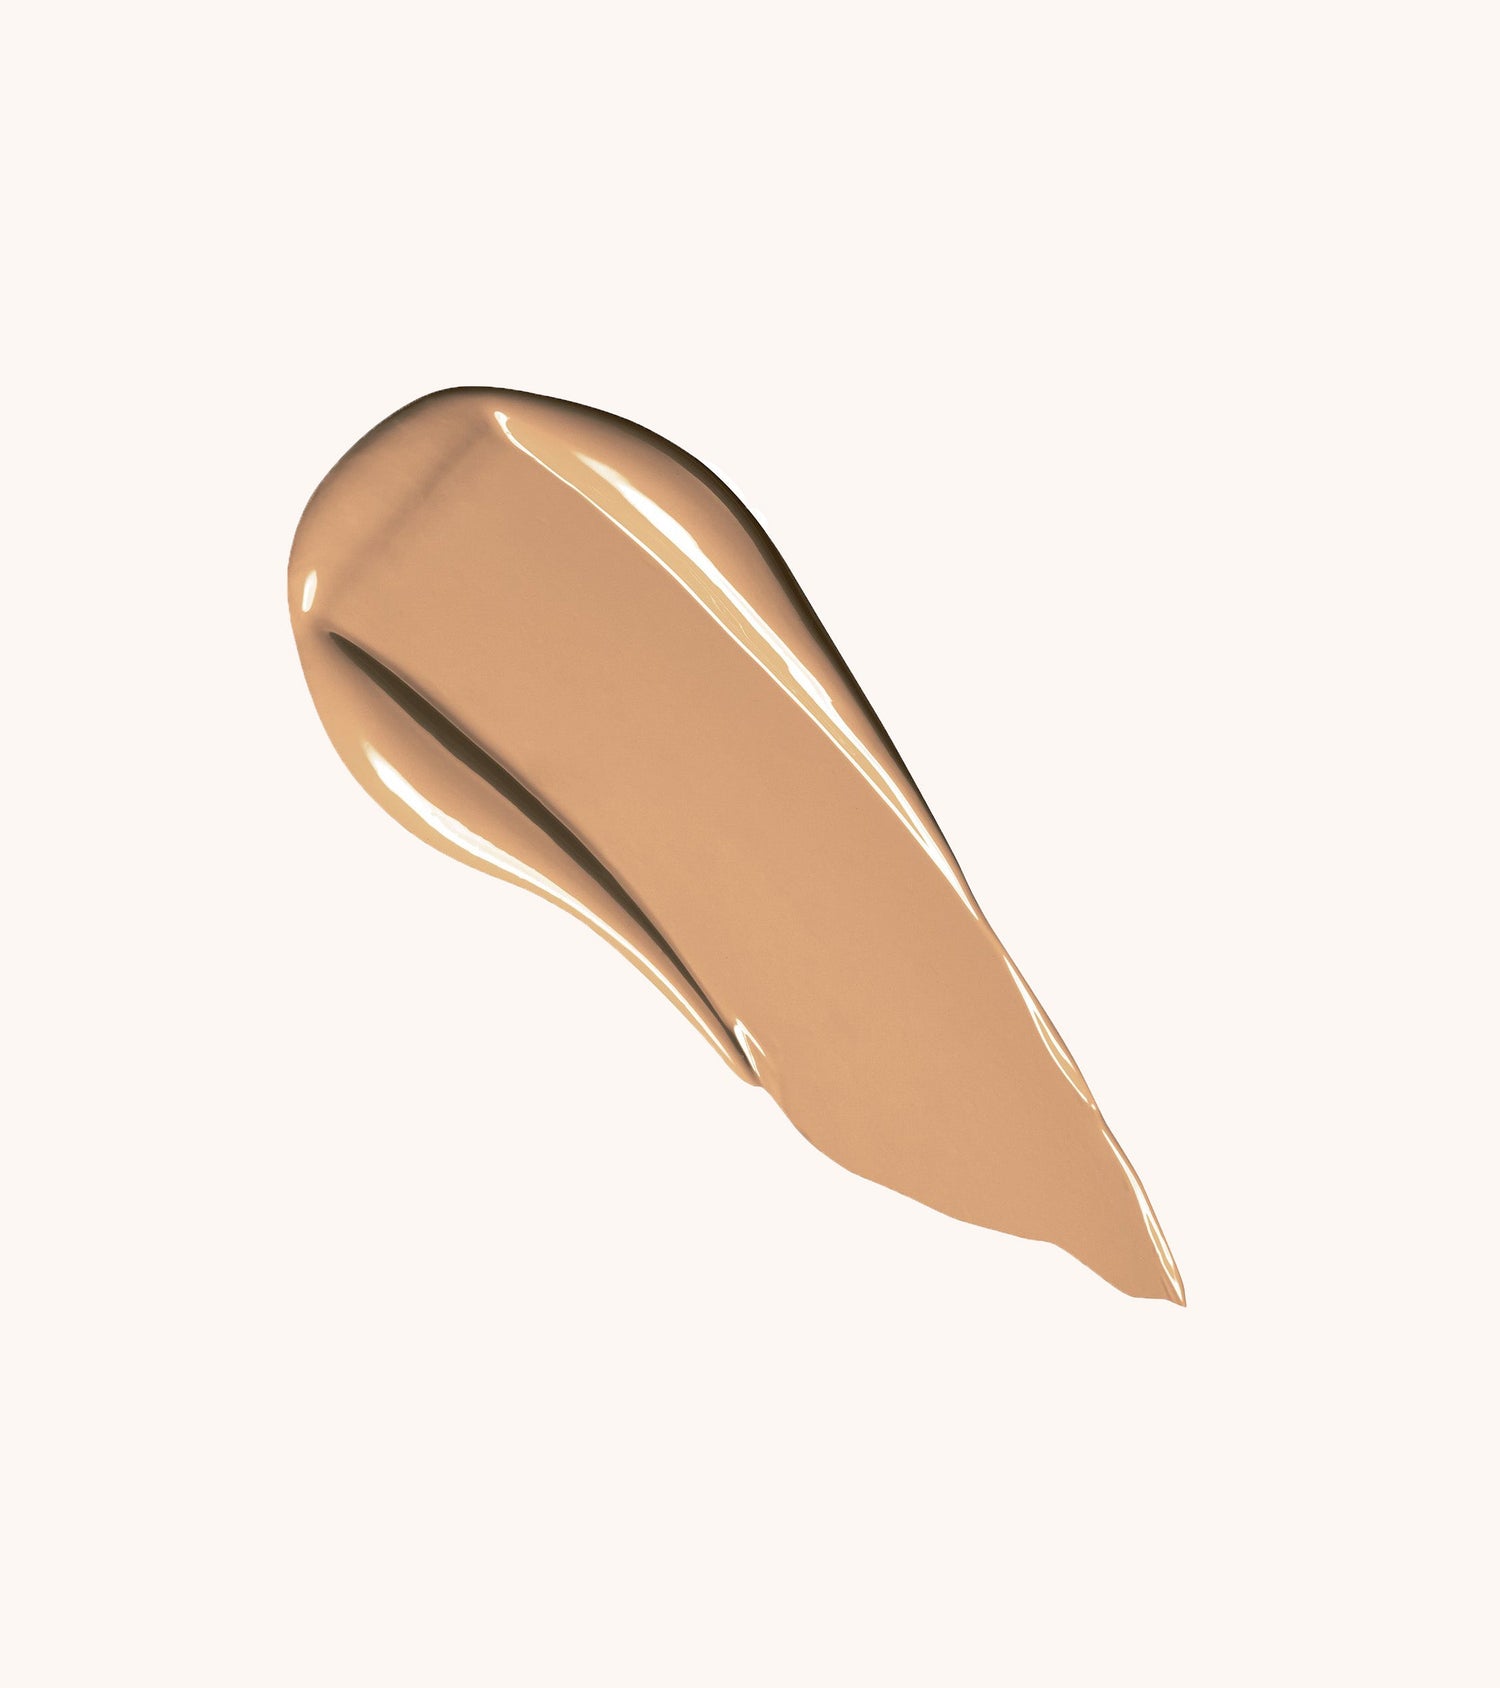 Authentik Skin Perfector Concealer (120 Evident) Main Image featured